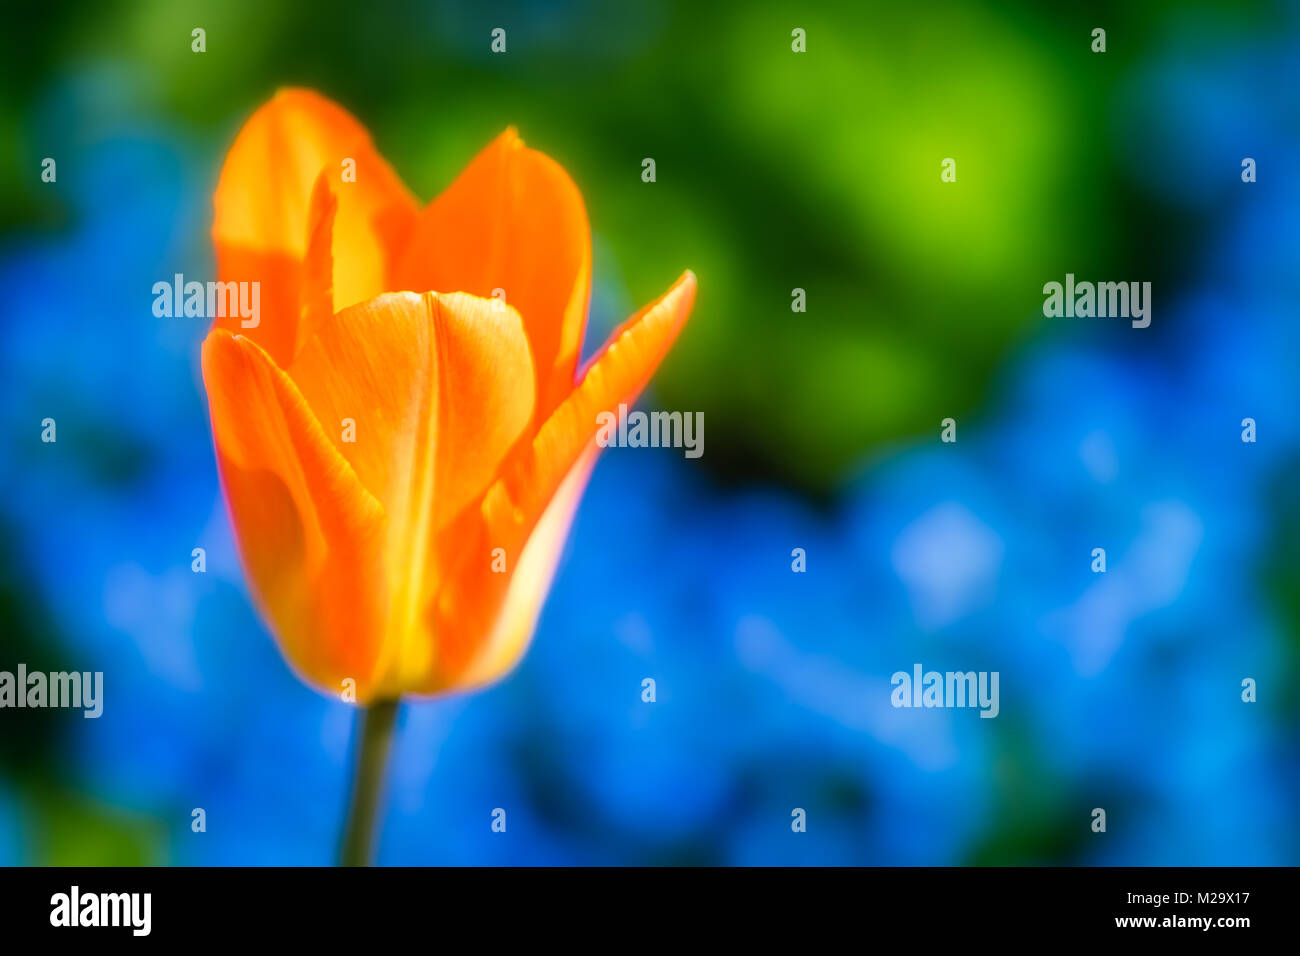 An orange tulip blossom in front of a blue flowerbed. Stock Photo